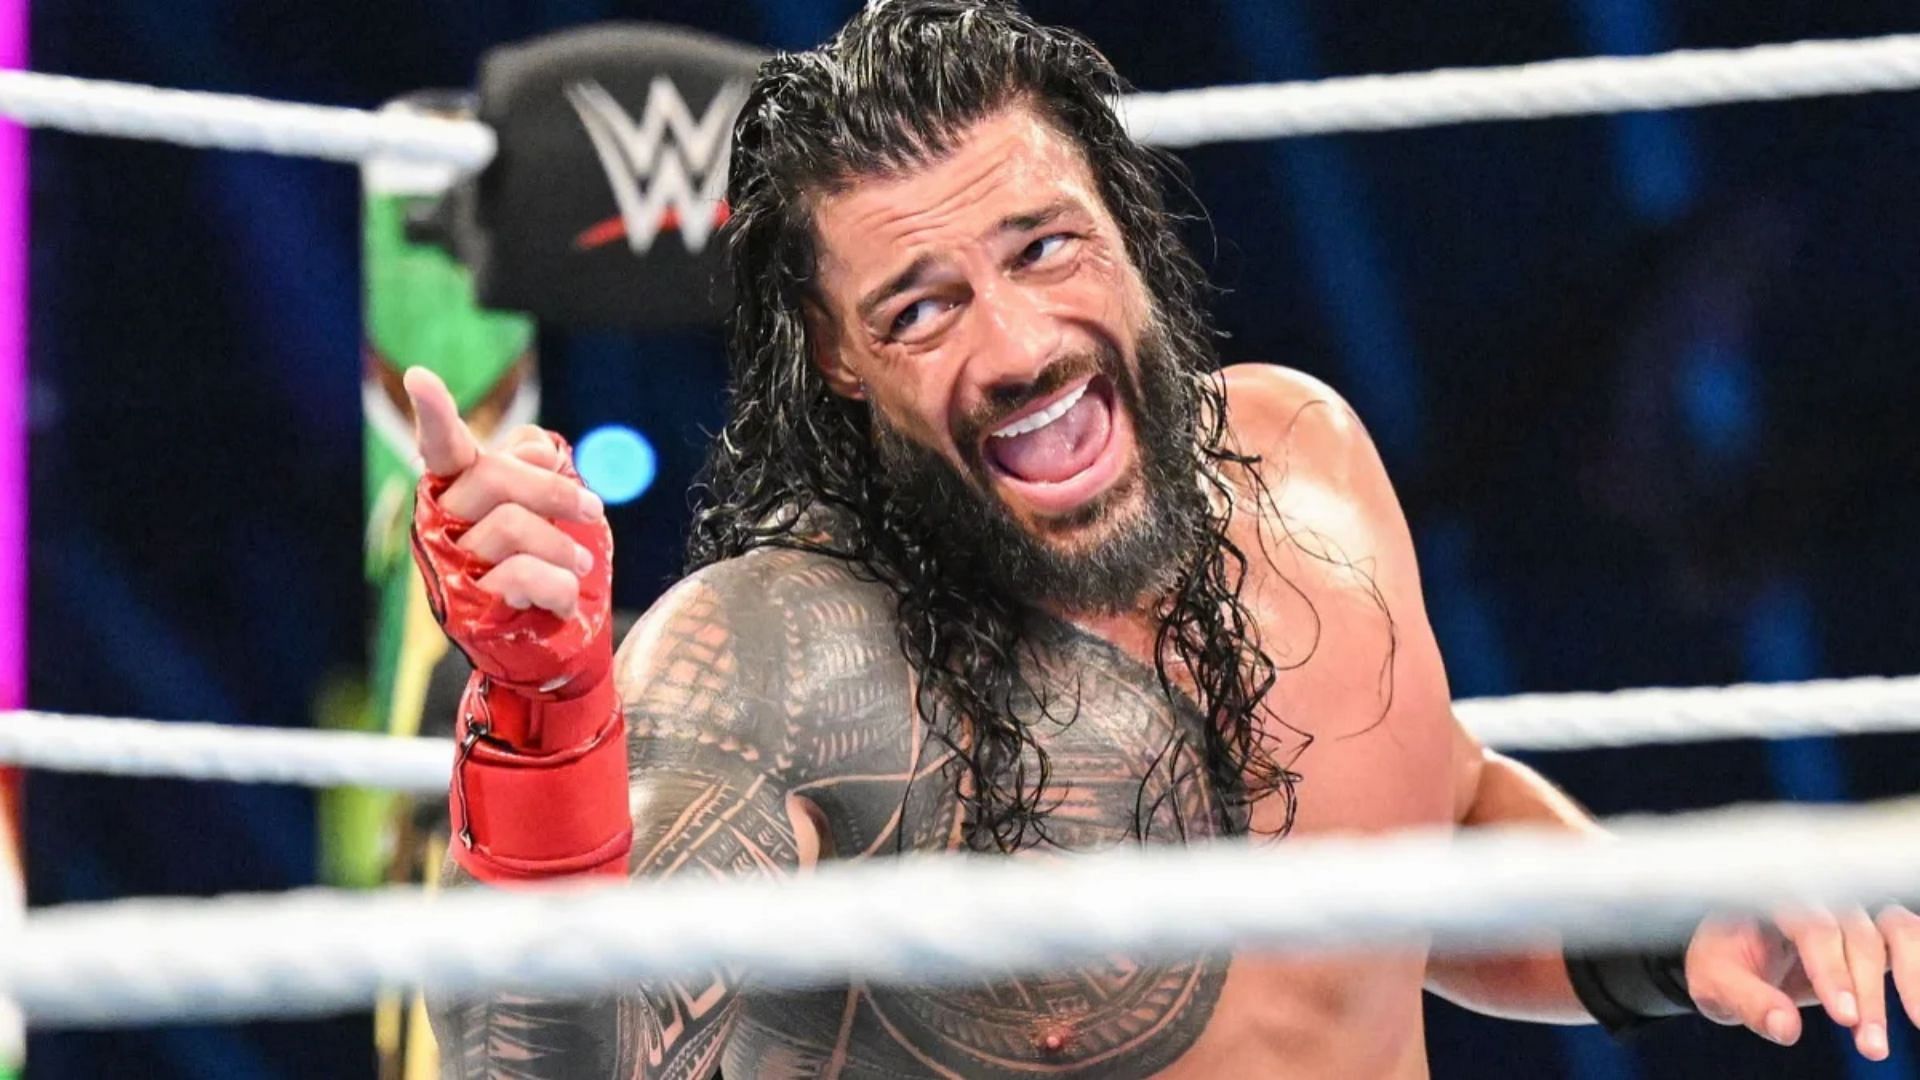 Roman Reigns might not be too happy come Friday